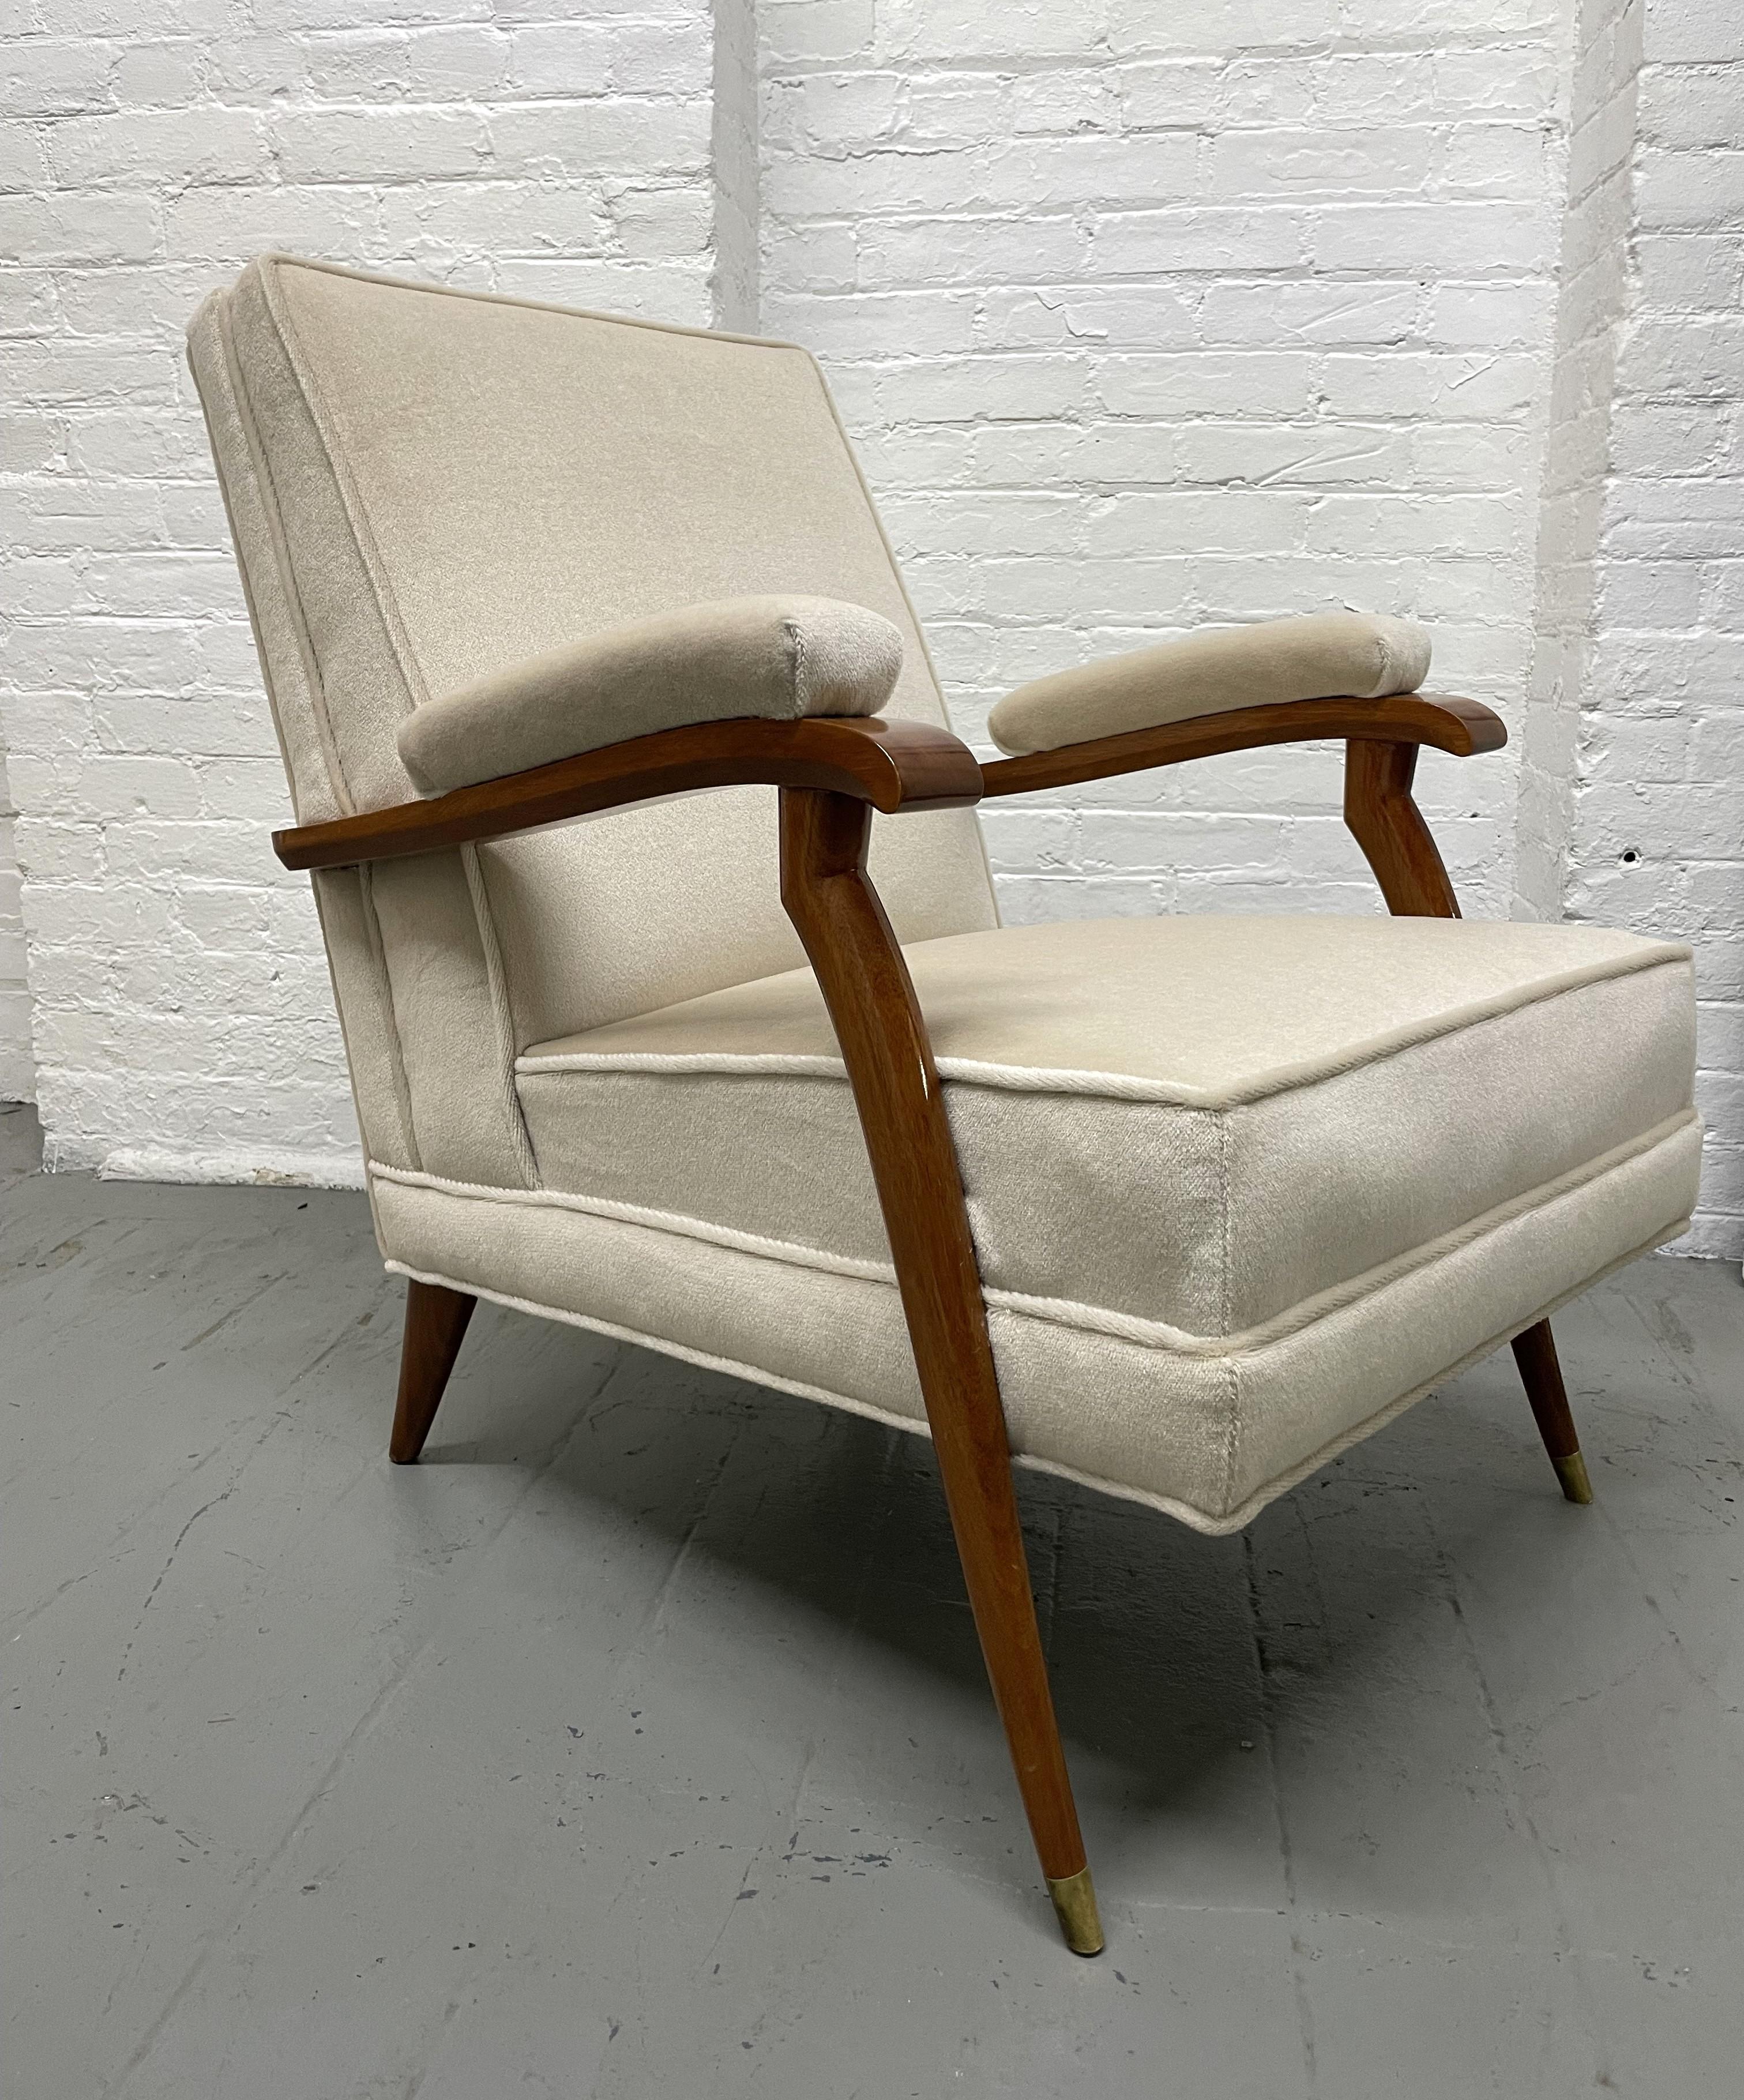 Mid-20th Century Mohair Lounge Chairs In the style of Maison Leleu For Sale